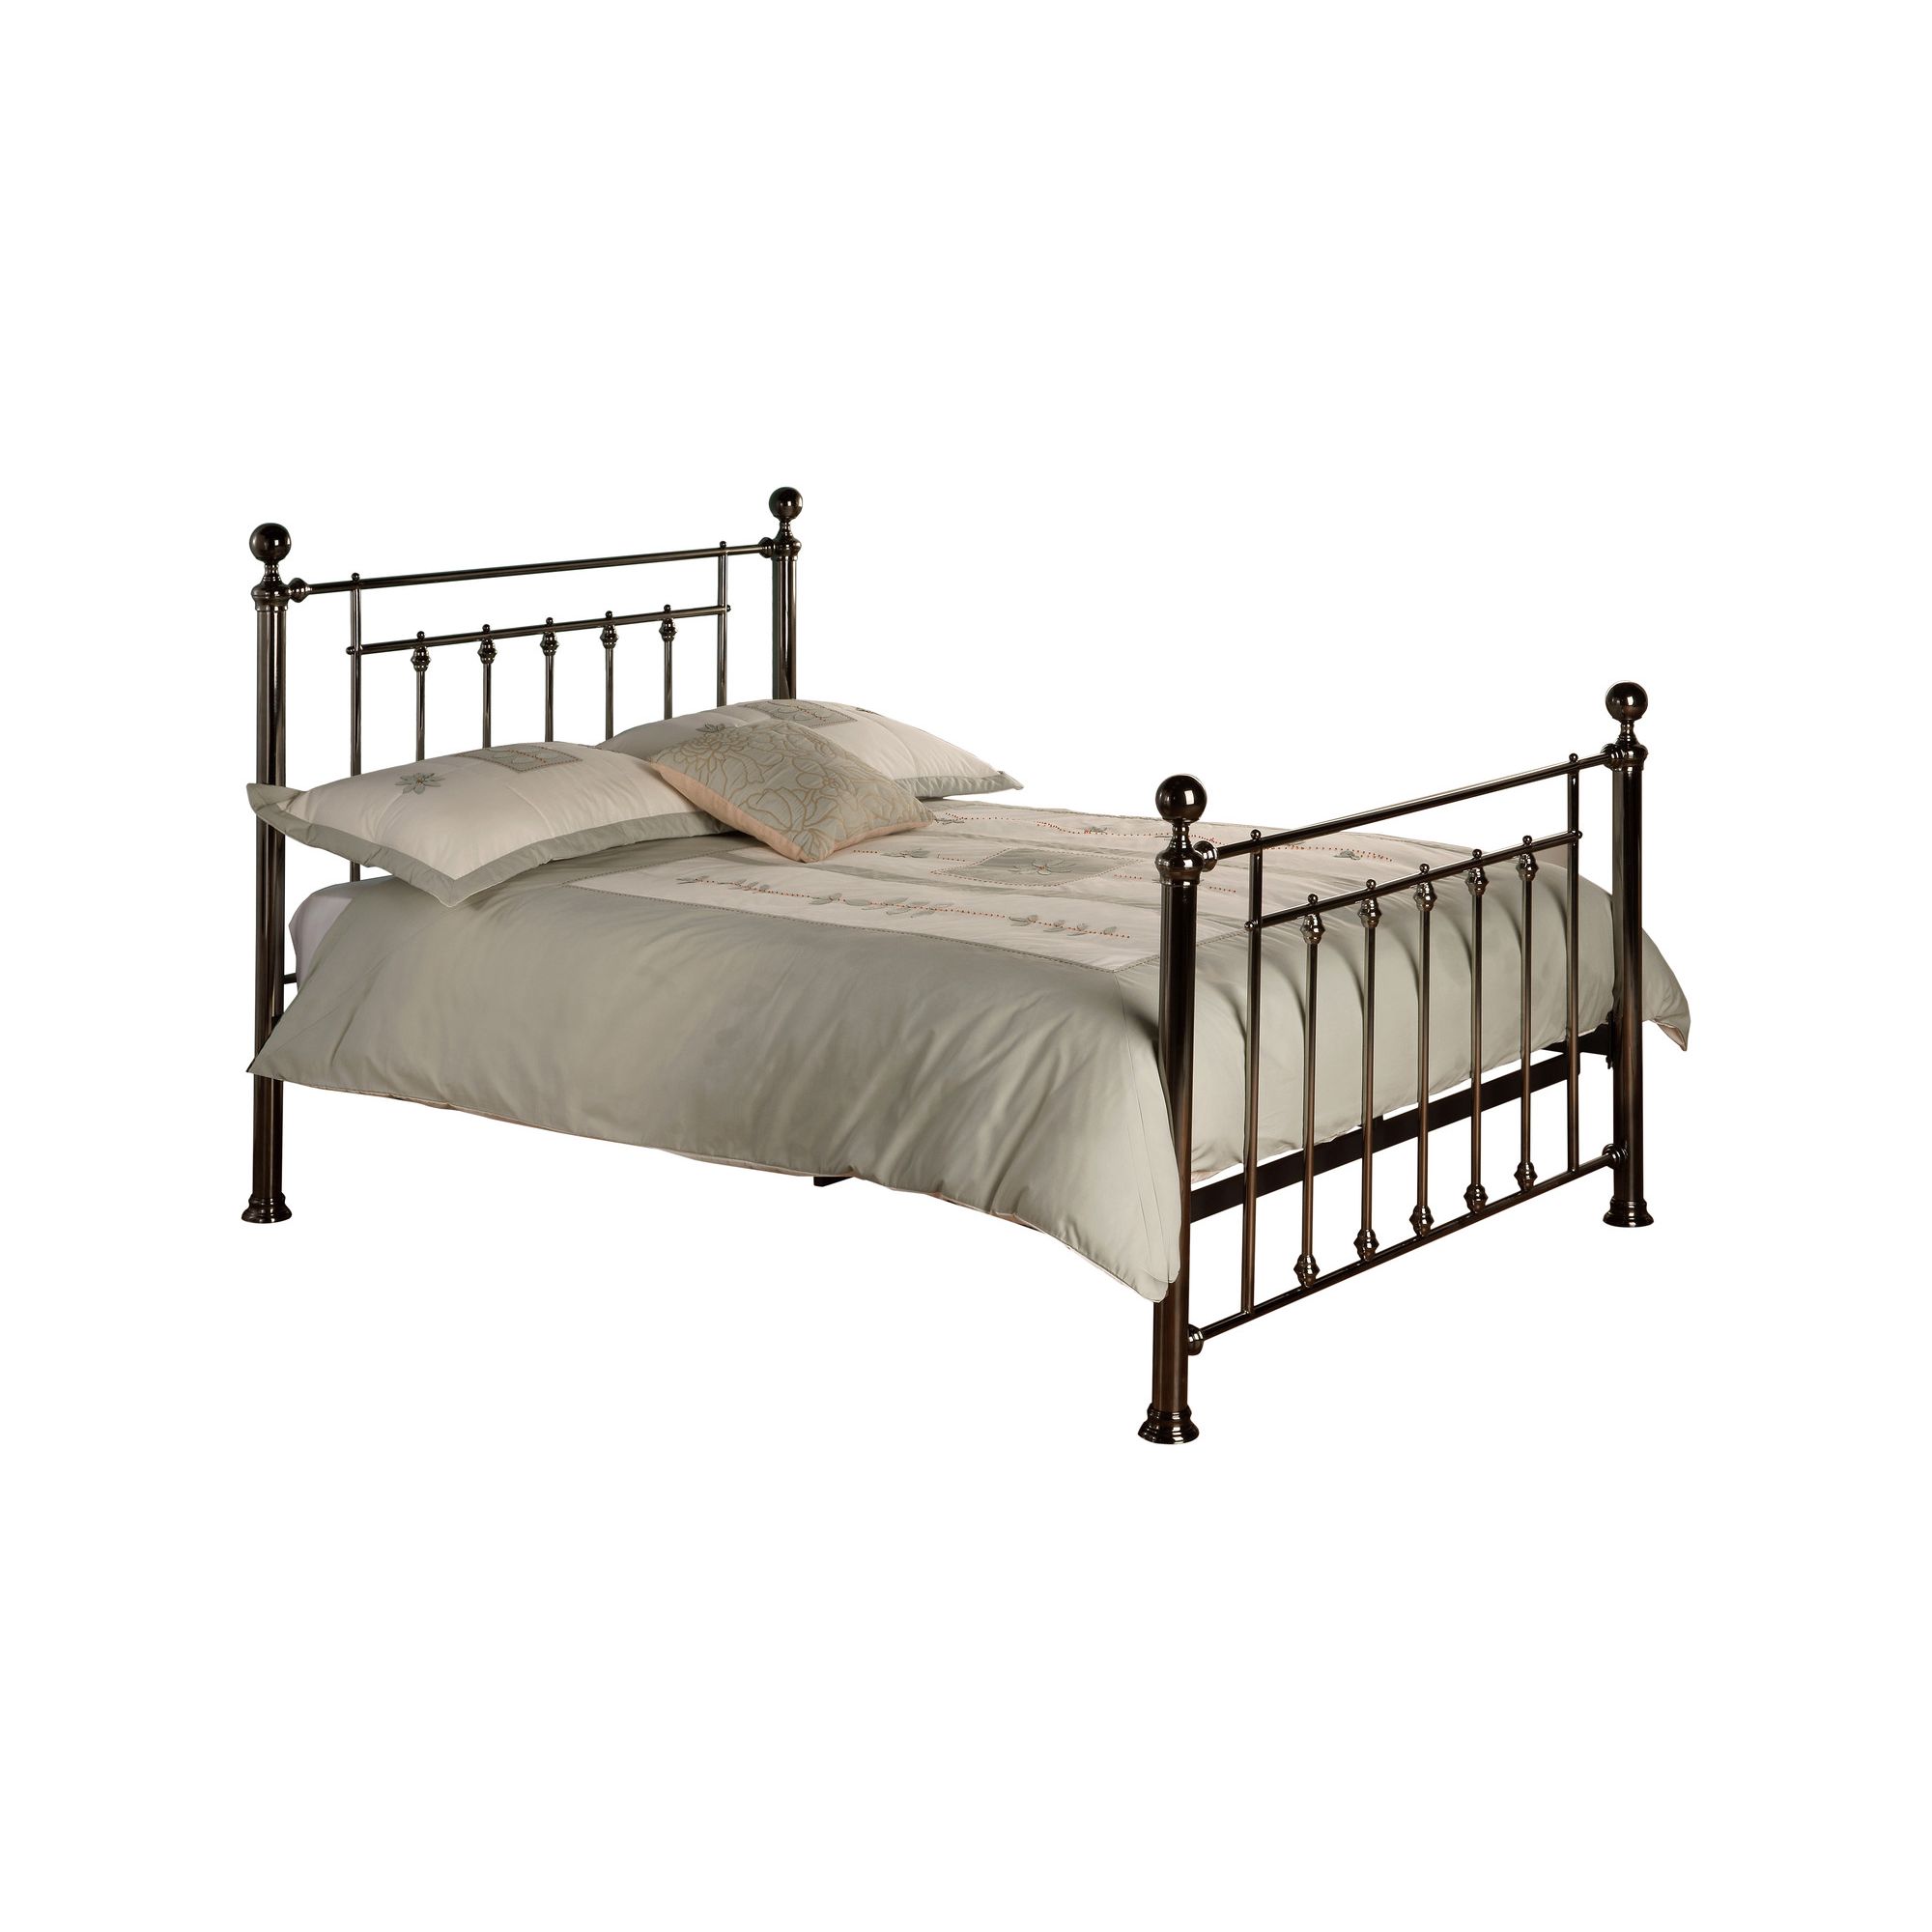 Limelight Libra Bed Frame - Double at Tescos Direct